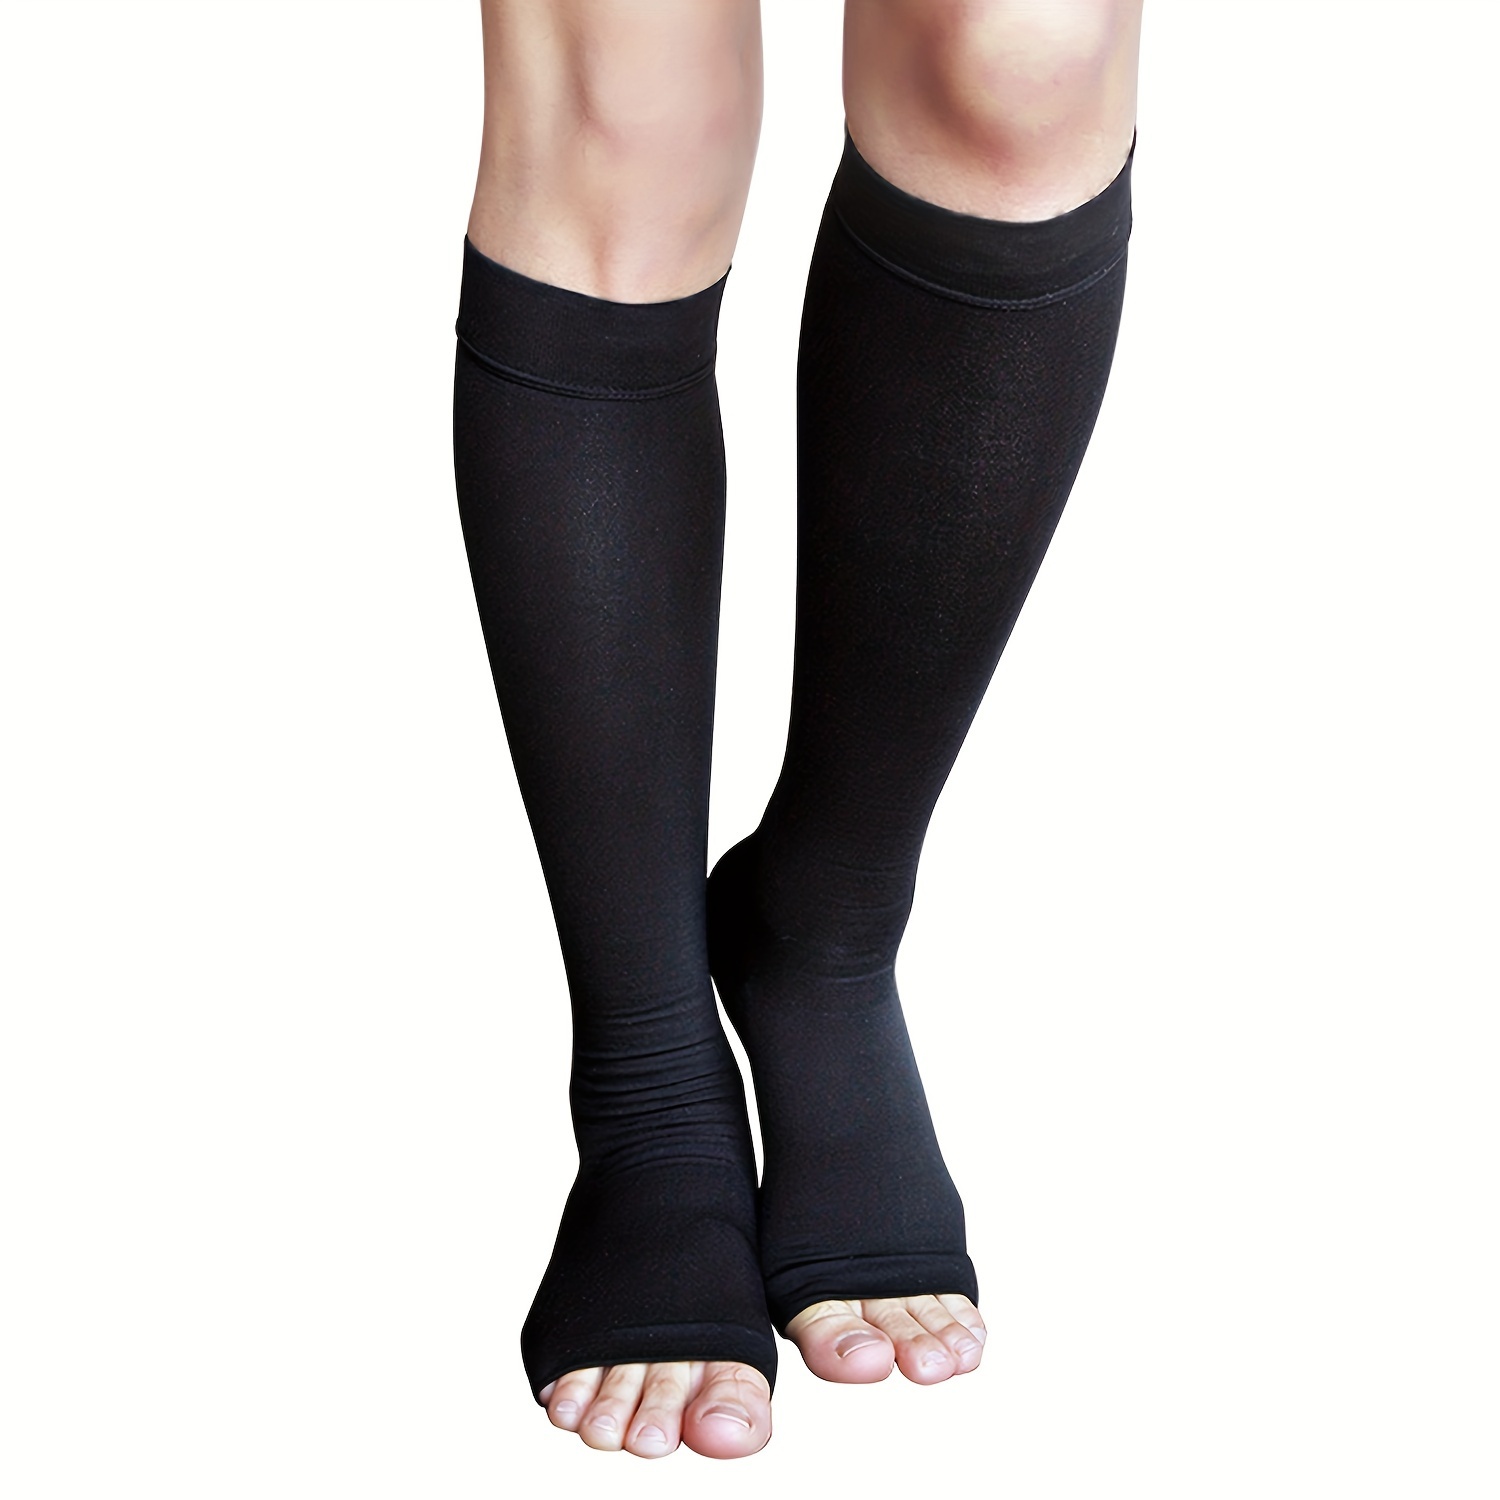 Knee High Elastic Compression Stocking With Open Toe Ccl 2 ( 23 - 32 Mhg )  1 - Sangyug Online Shop %